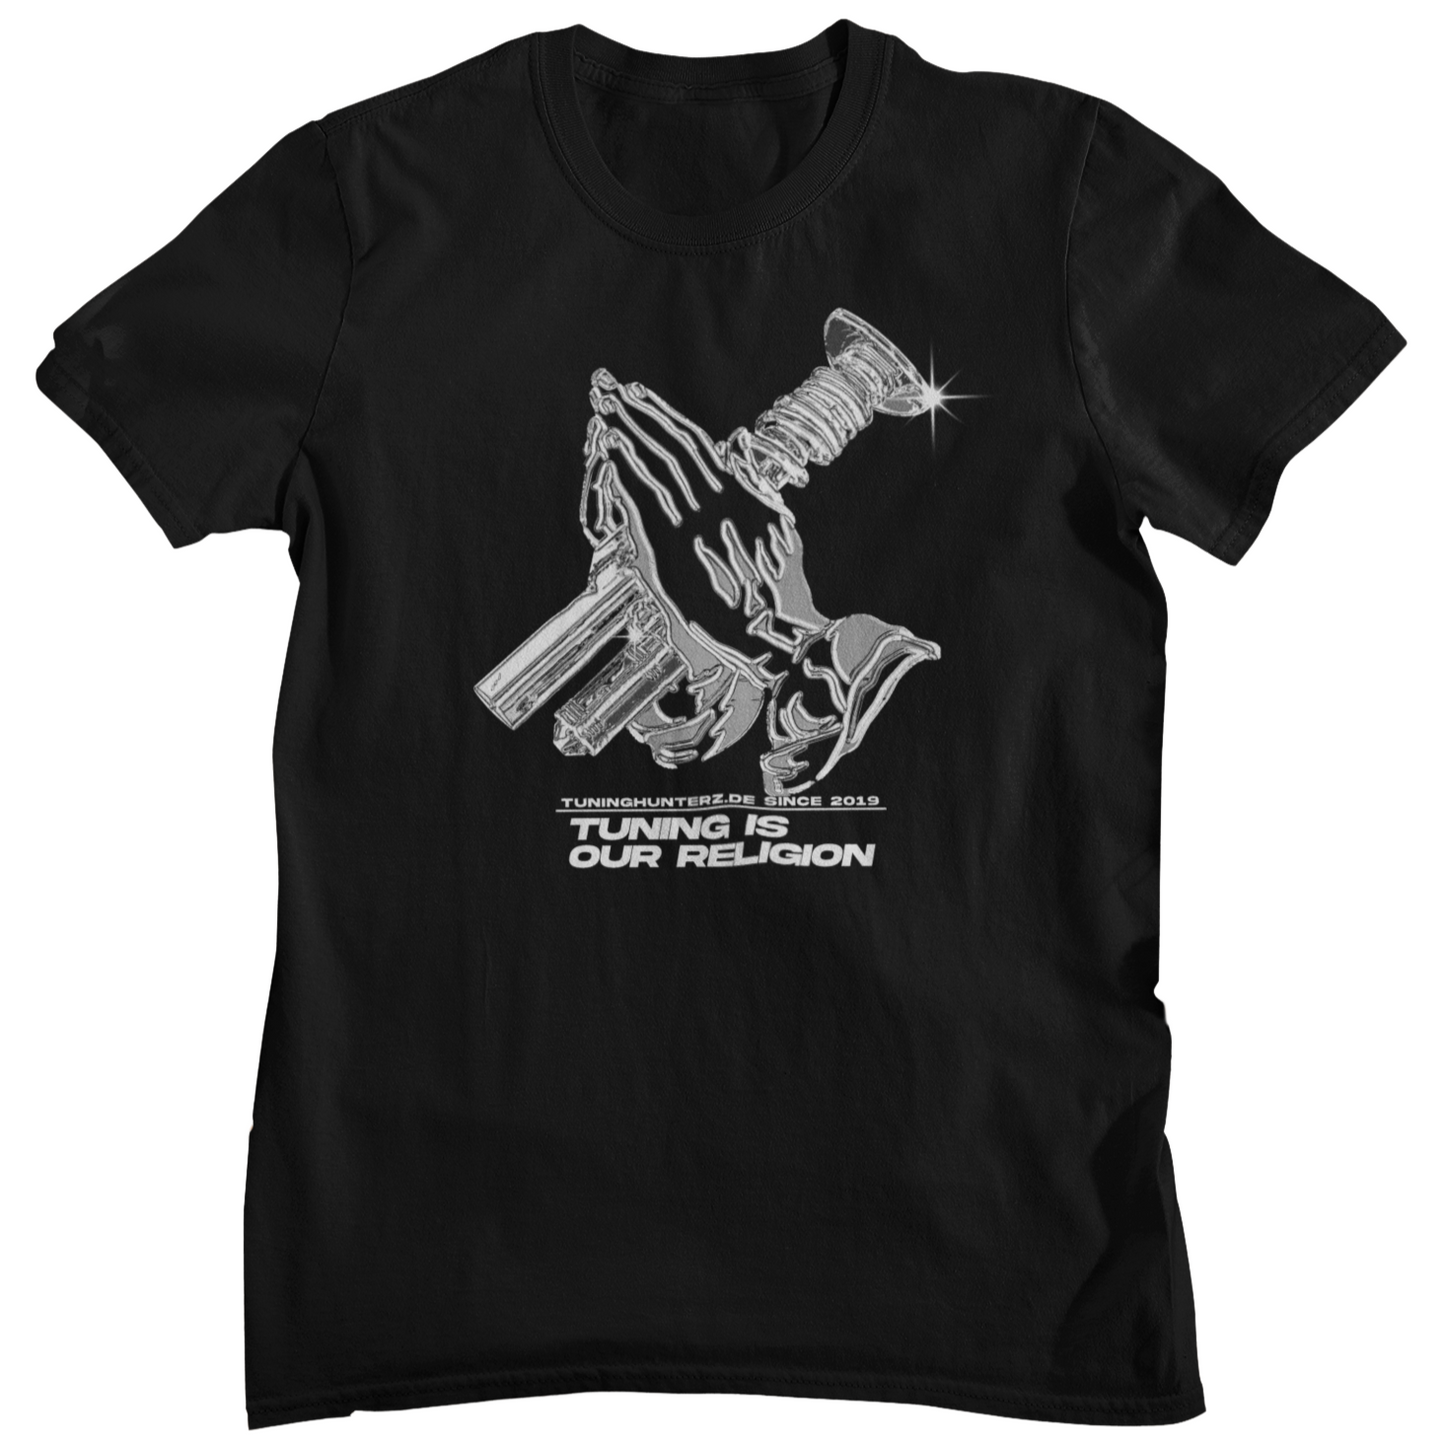 Tuning is our religion - Unisex Shirt